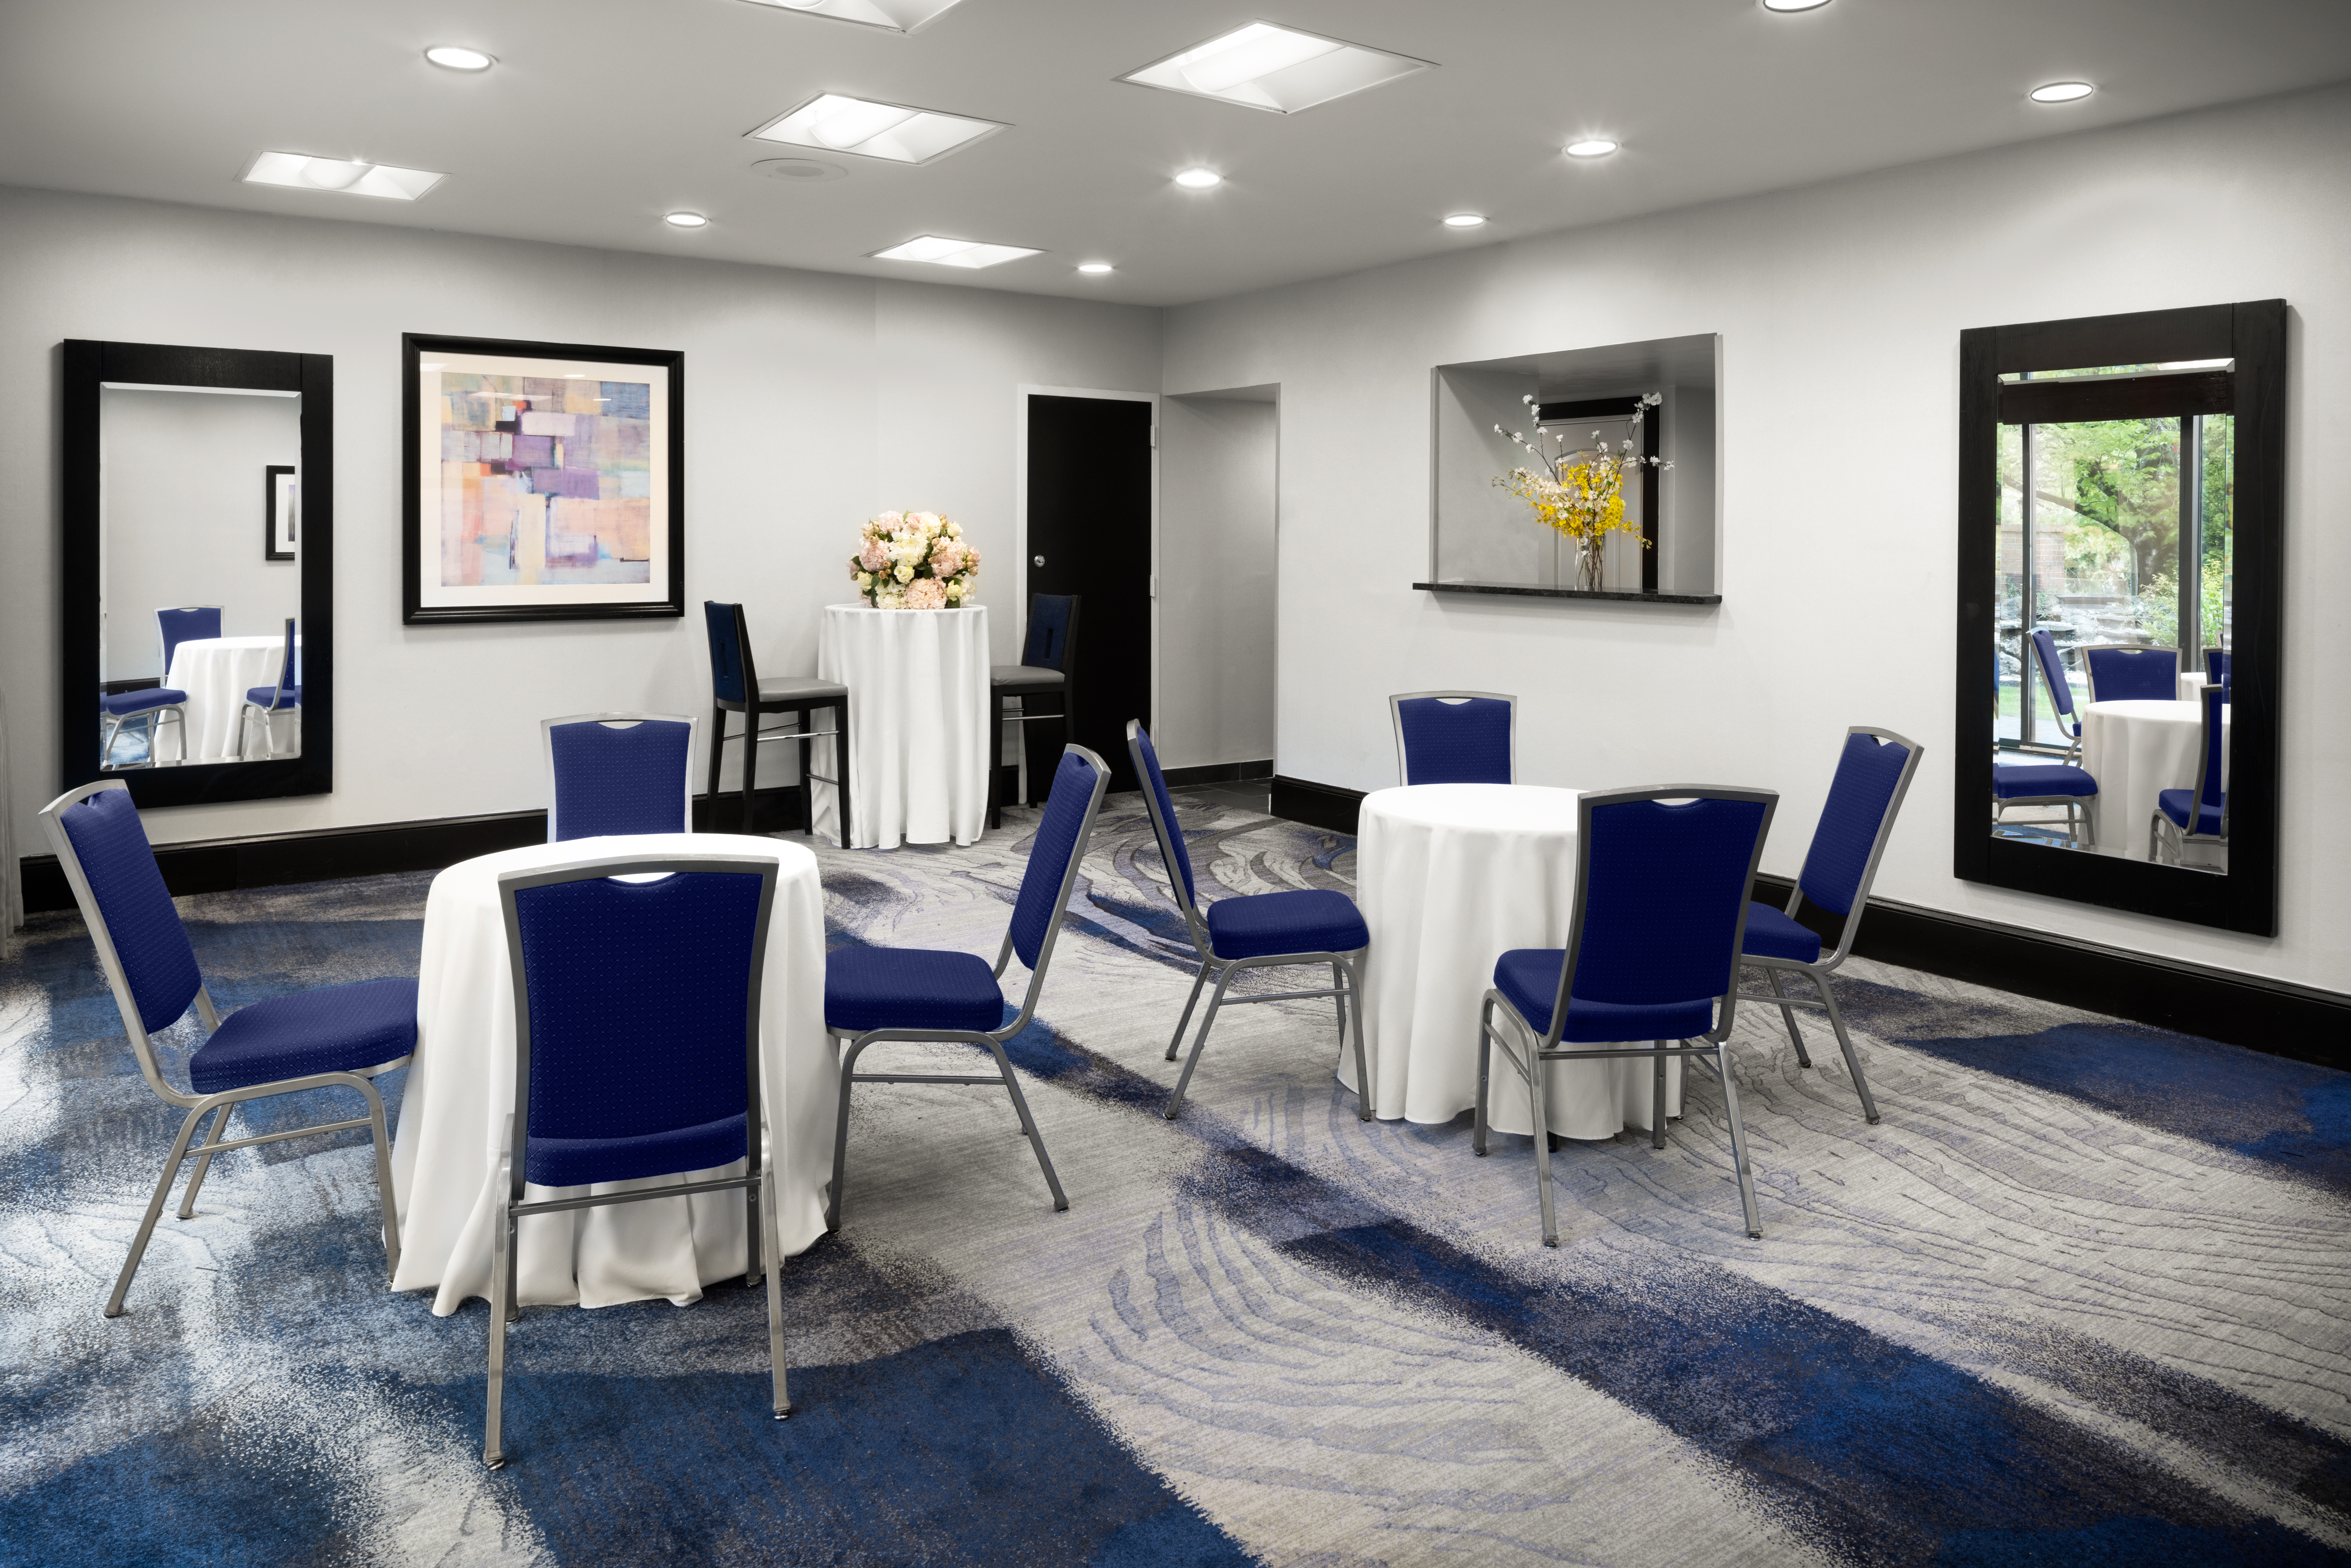 Meeting Room with Small Round Tables and Chairs